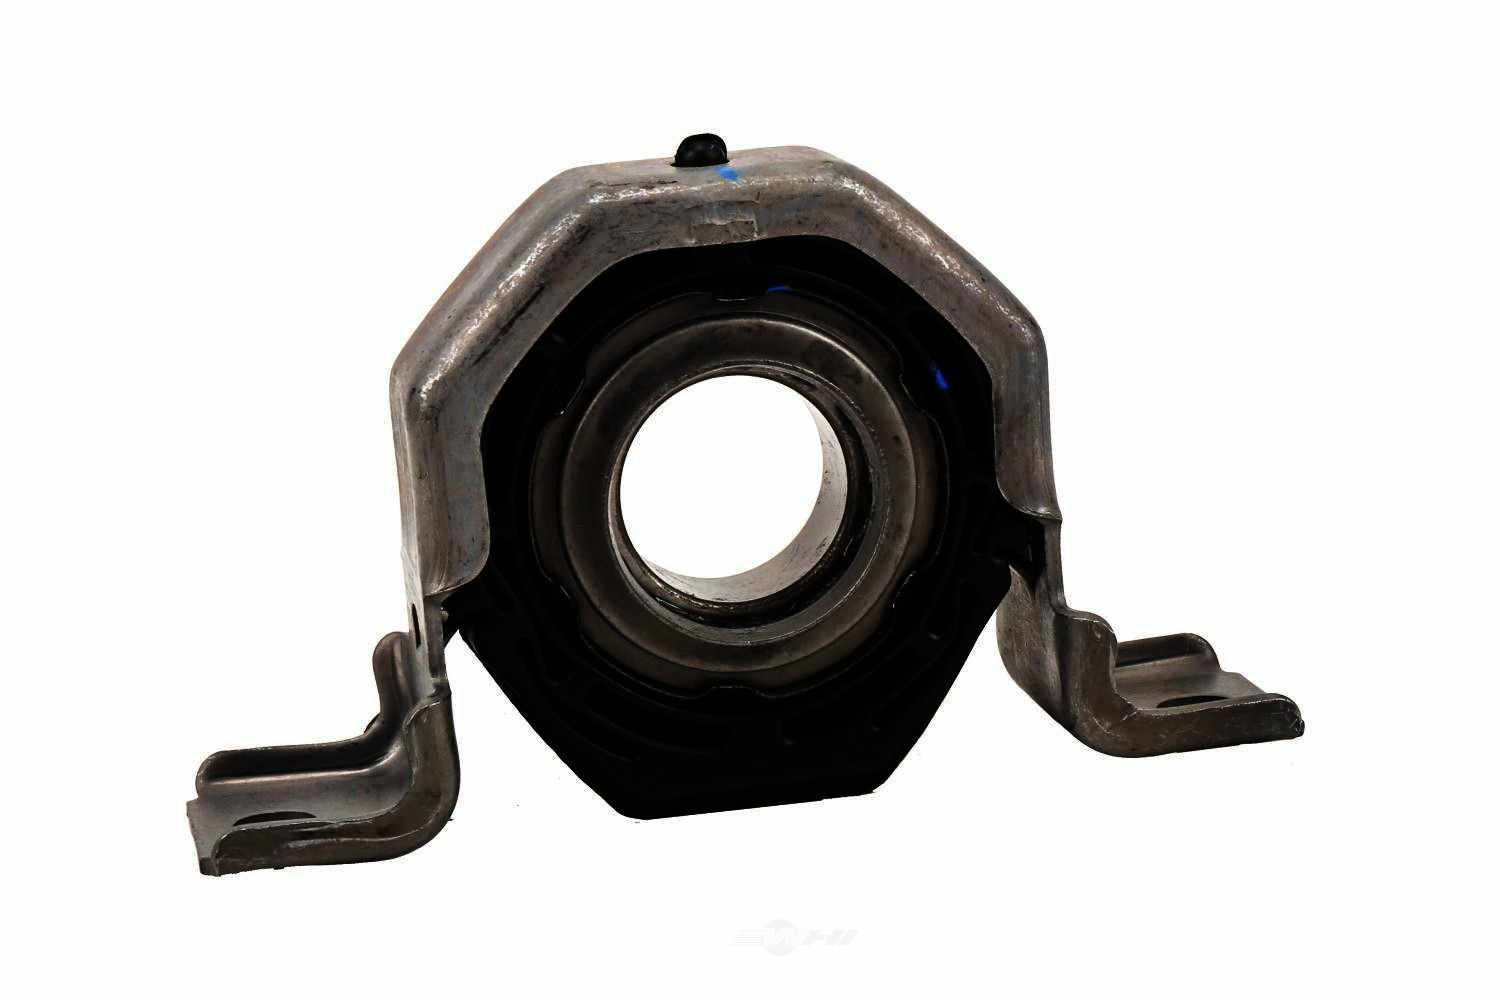 GM GENUINE PARTS - Drive Shaft Center Support Bearing - GMP 84448547